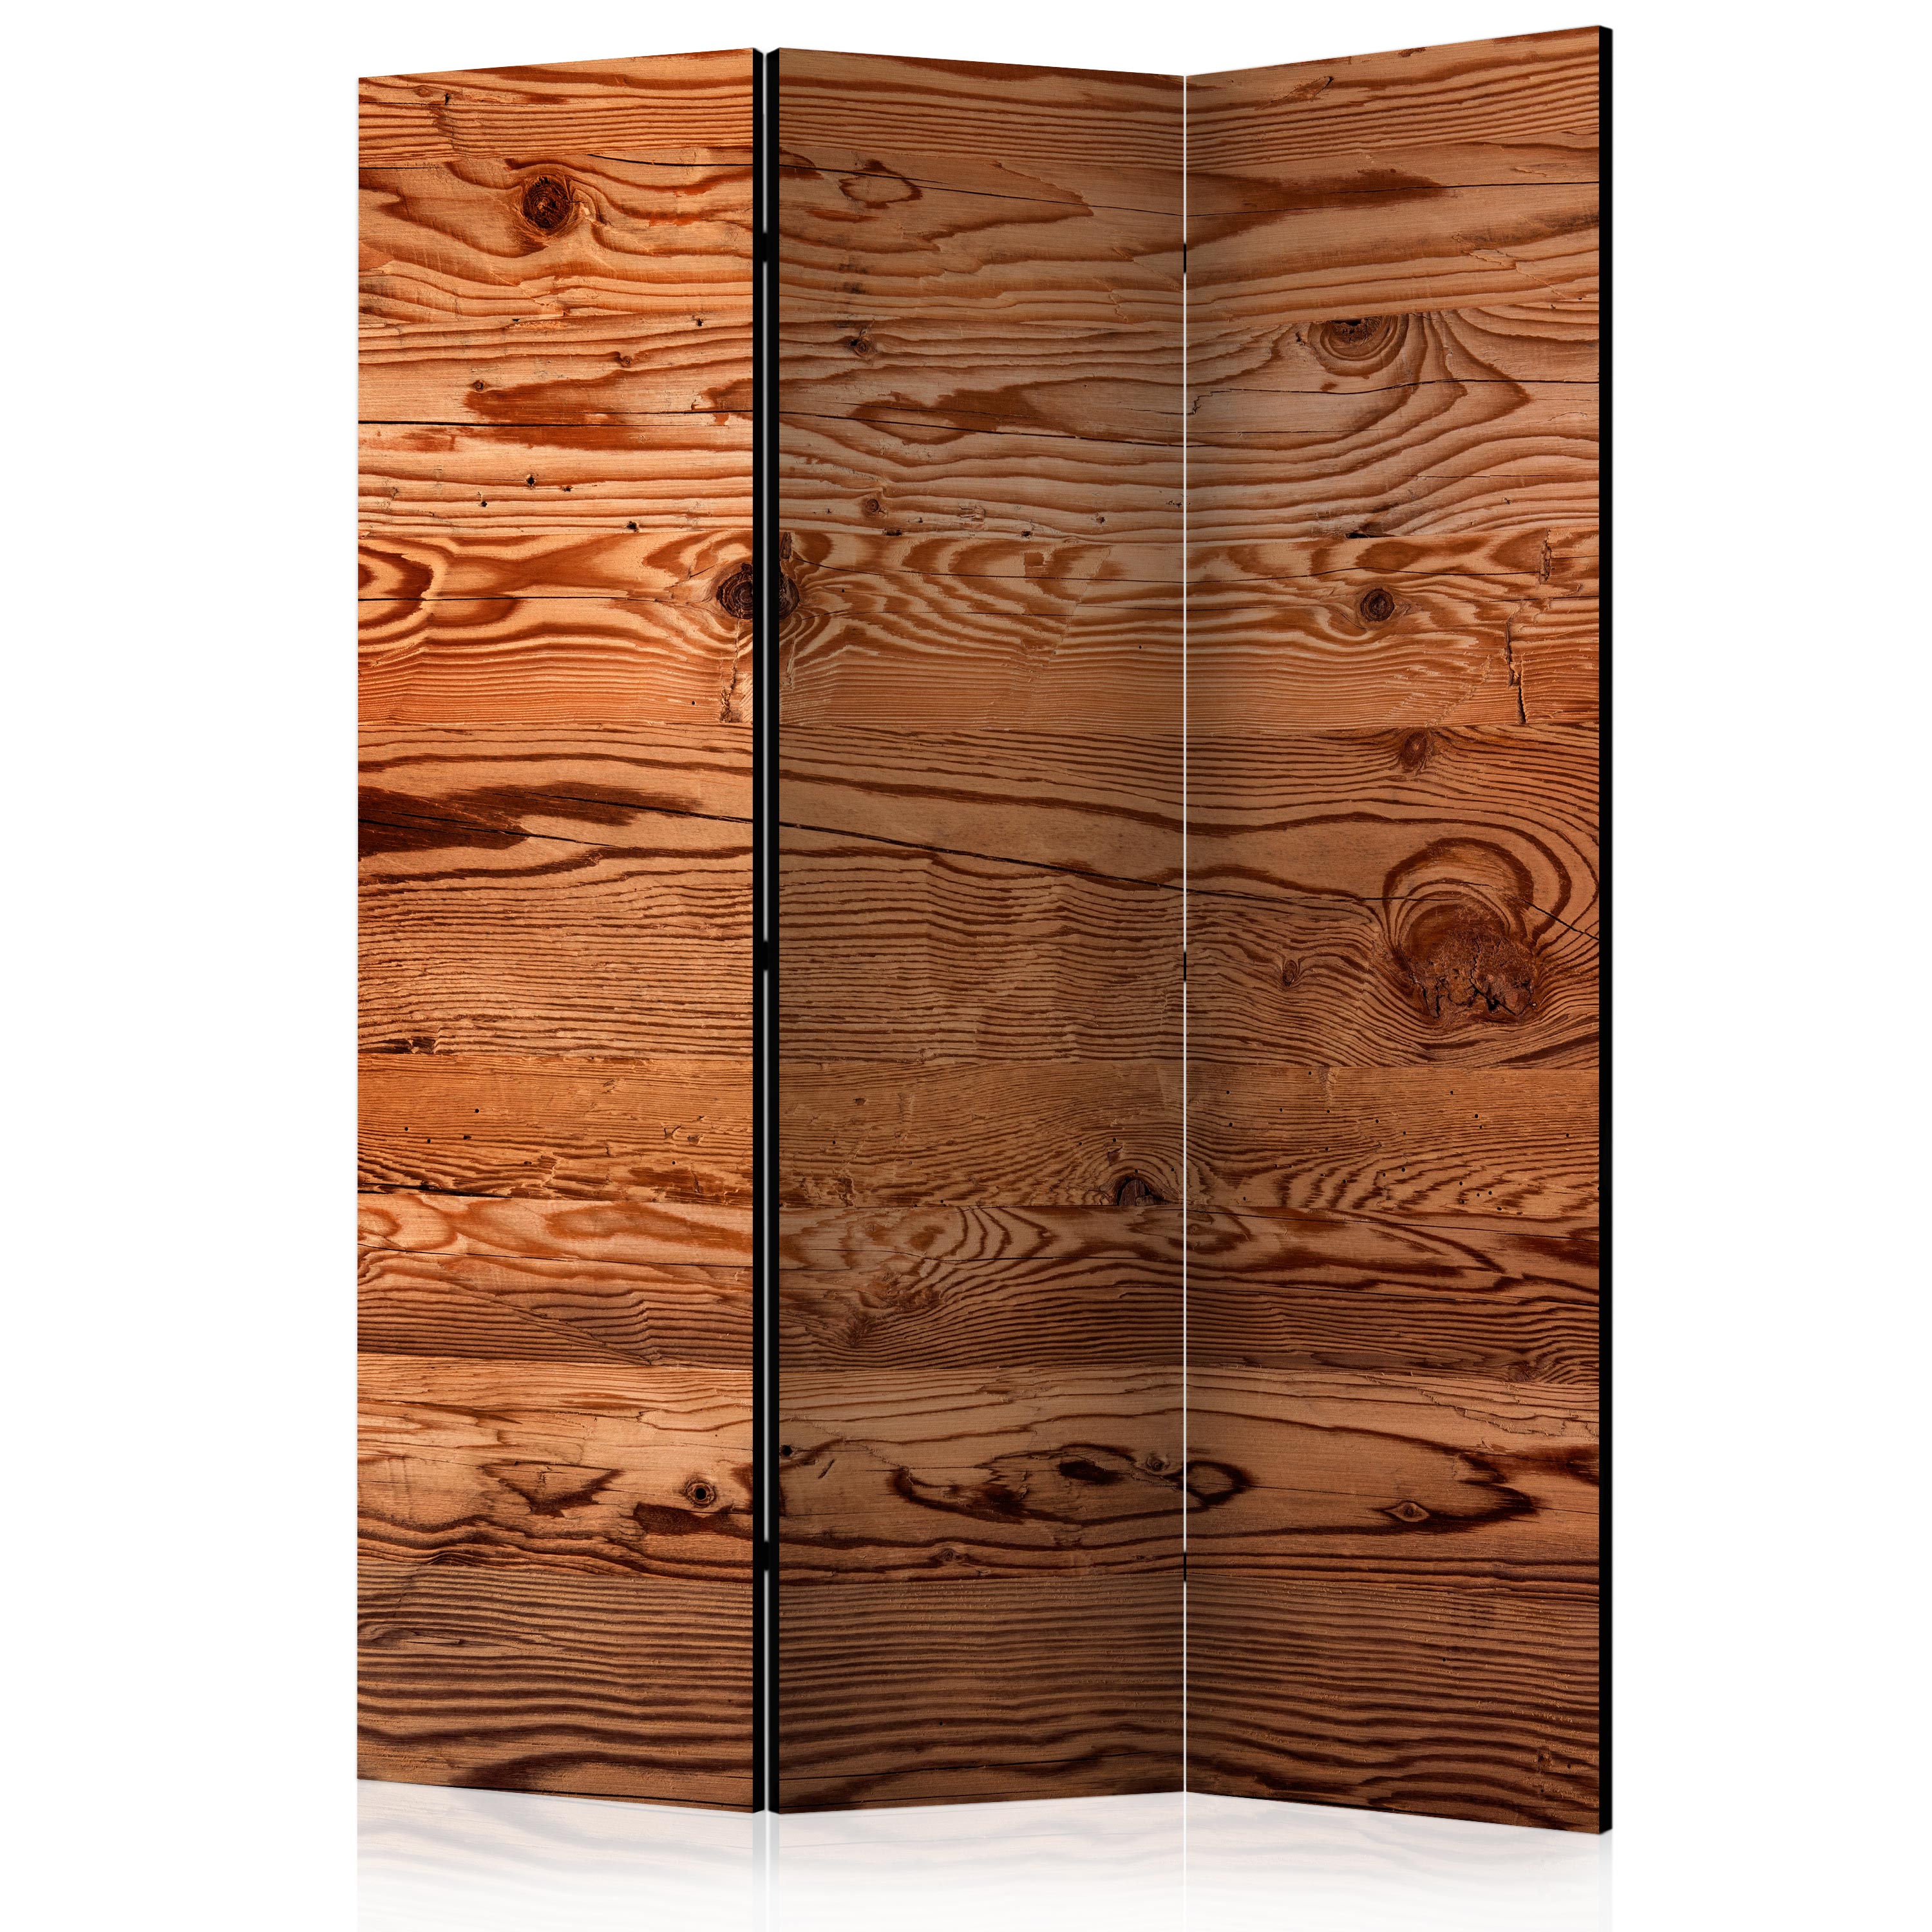 Room Divider - Rustic Chic [Room Dividers] - 135x172